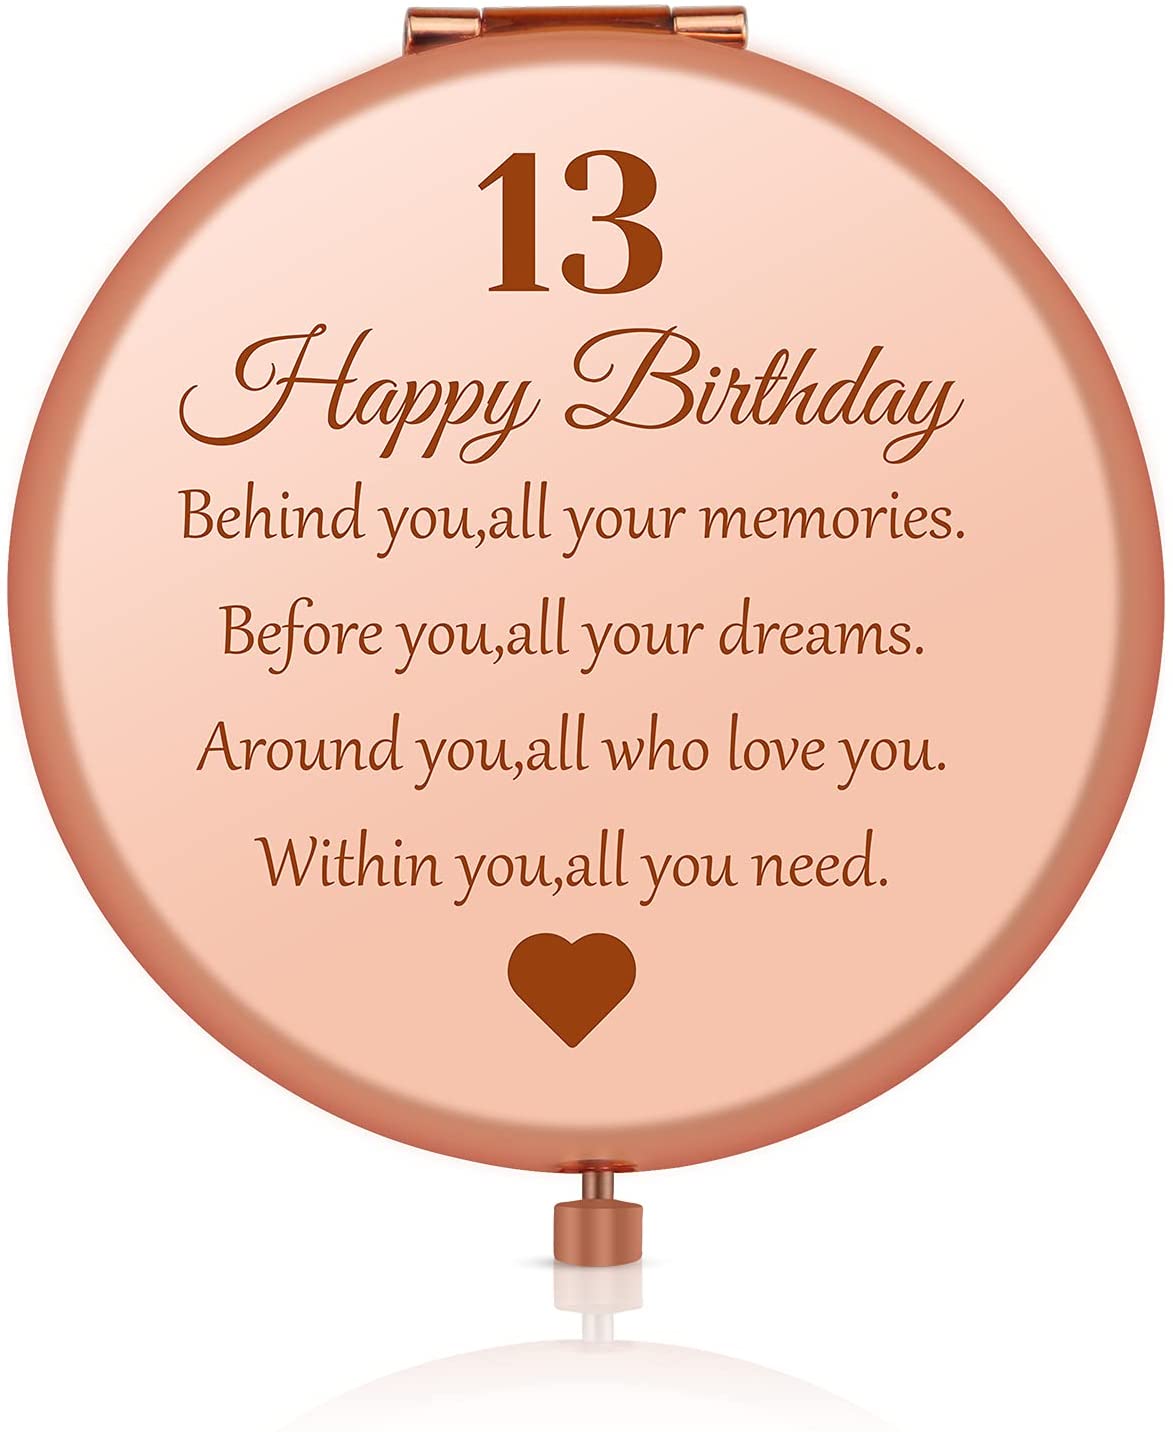 120+ Birthday Wishes for 13 Year Olds - Birthday SMS & Wishes ...